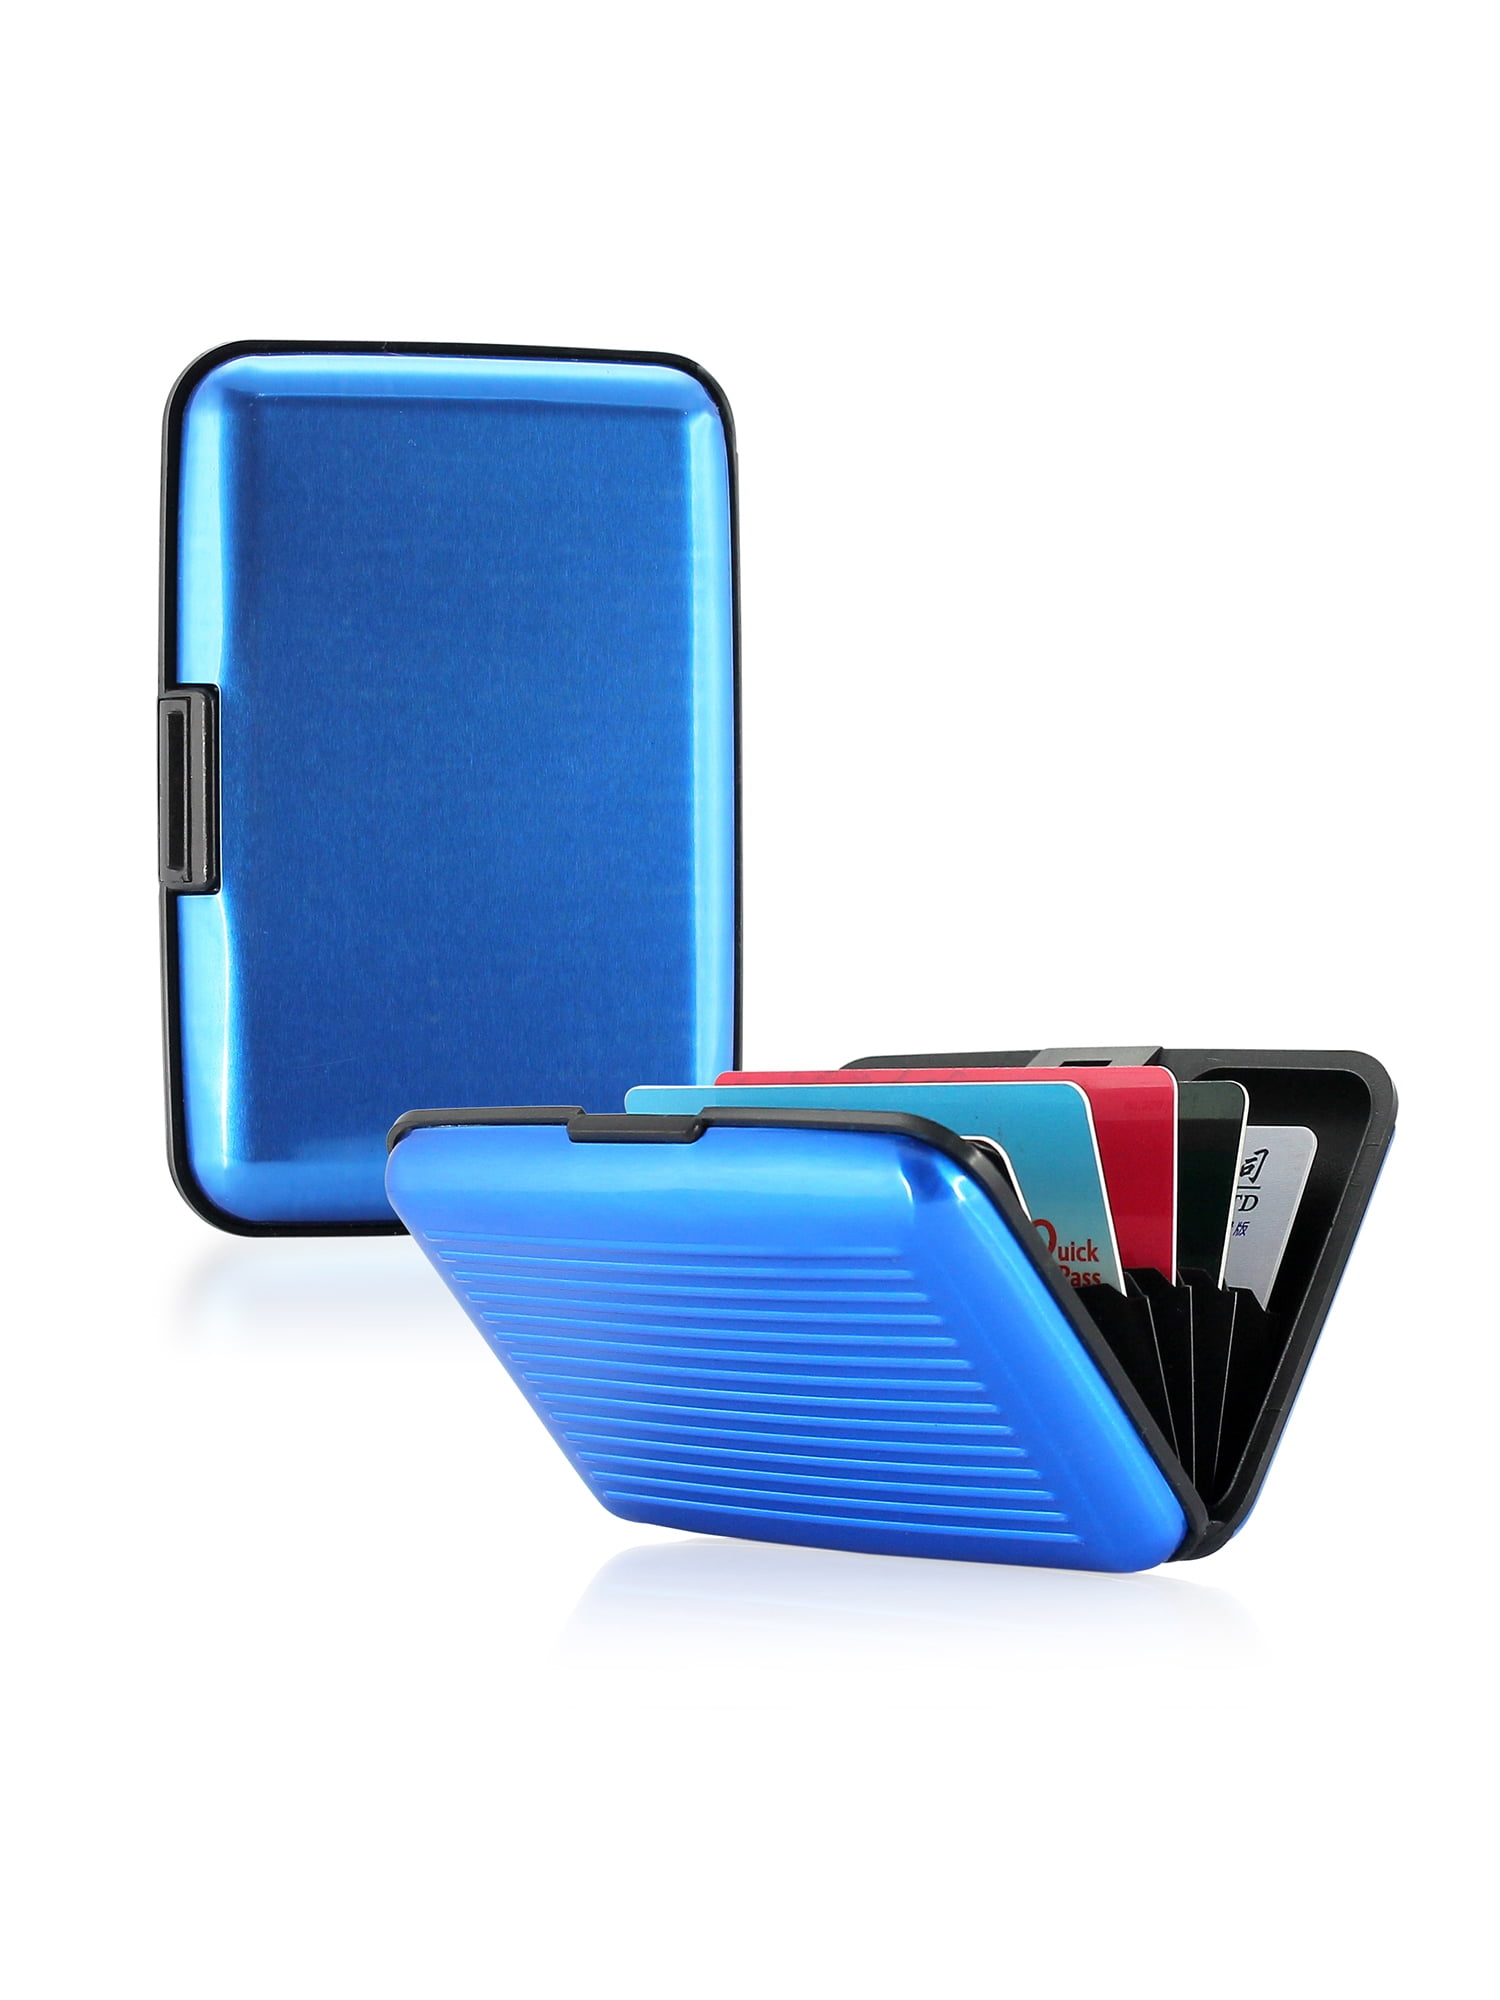 Gearonic - Aluminum Pocket Business ID Credit Cards Wallet Holder Case Metal Box - mediakits.theygsgroup.com